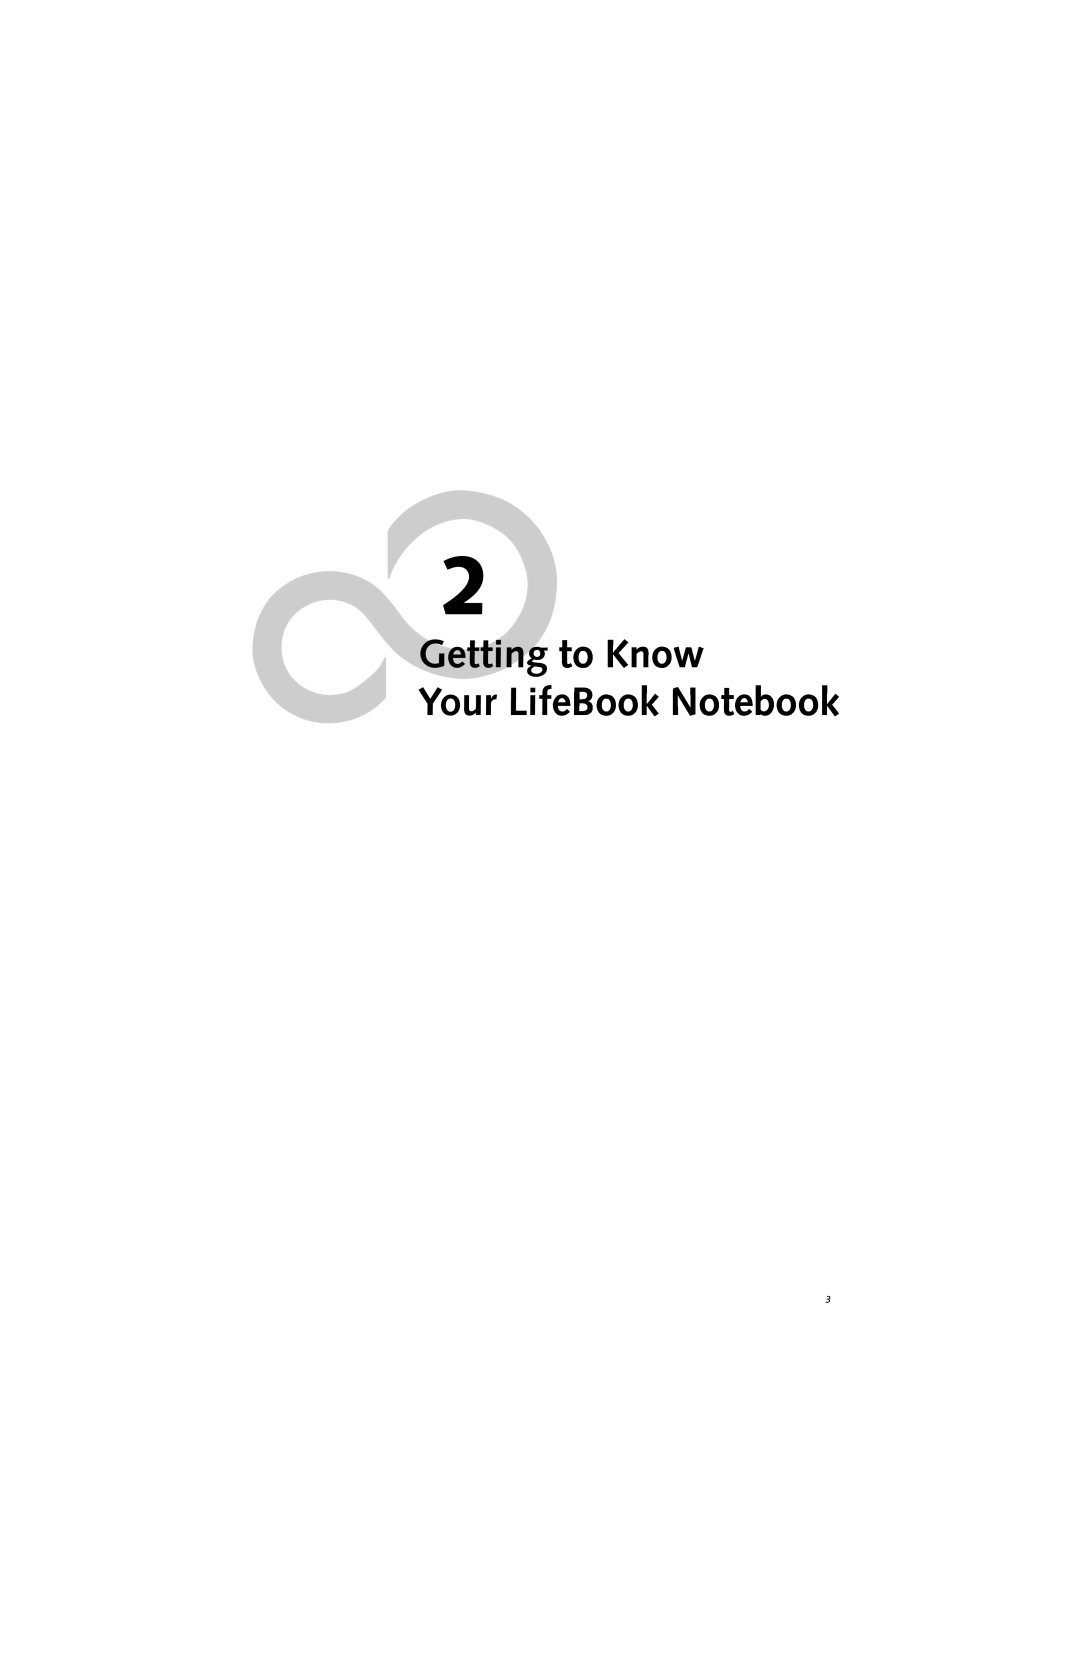 Fujitsu S7210 manual Getting to Know Your LifeBook Notebook 